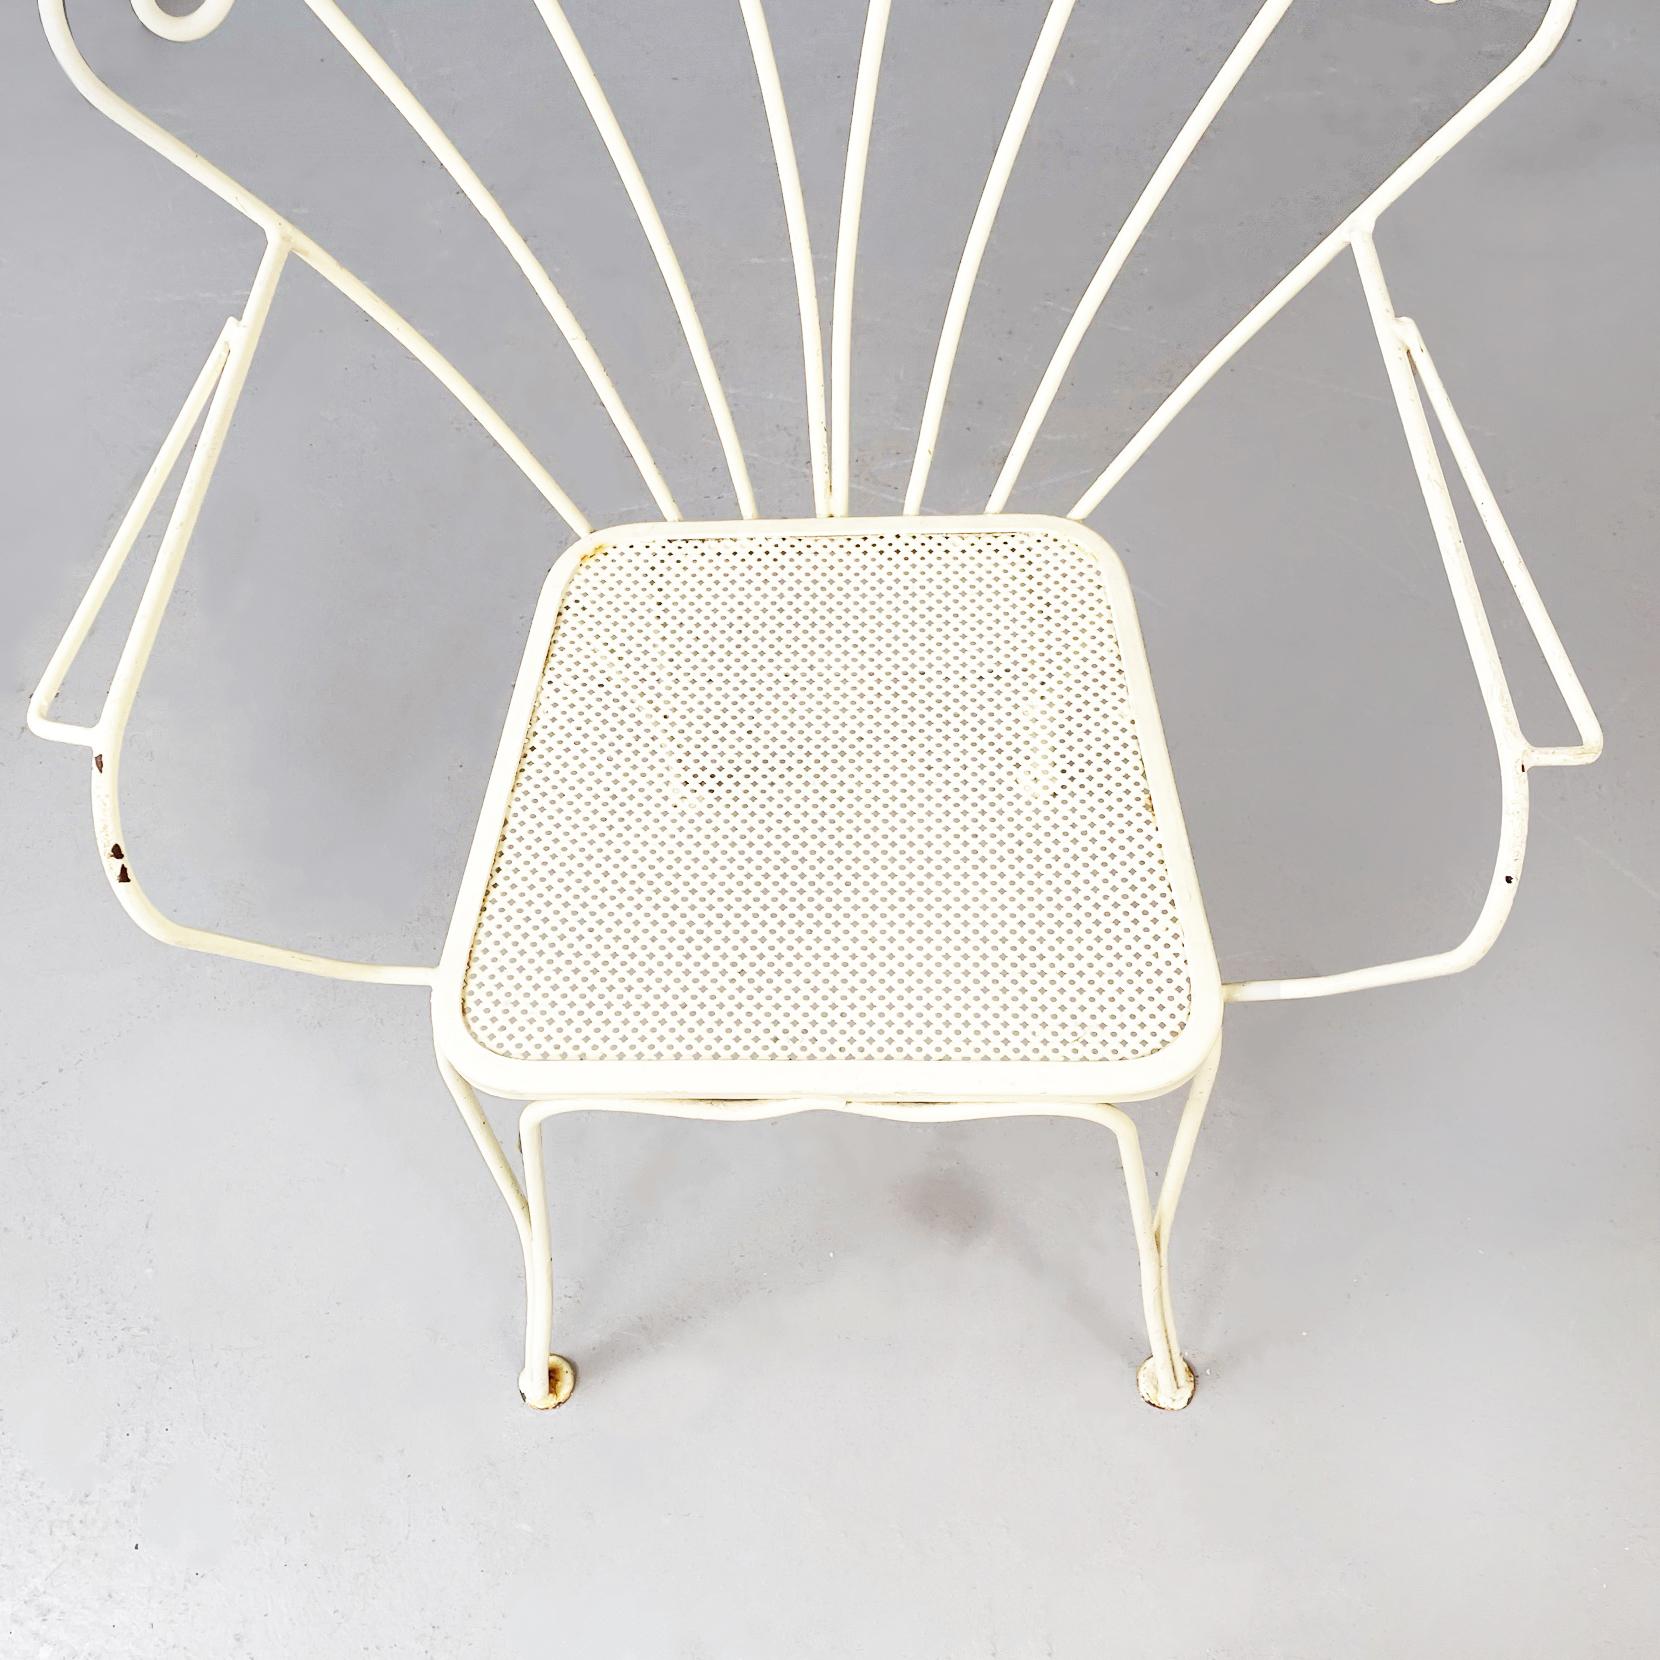 Italian Mid-Century Modern Garden Chairs and Table in White Wrought Iron, 1960s For Sale 1